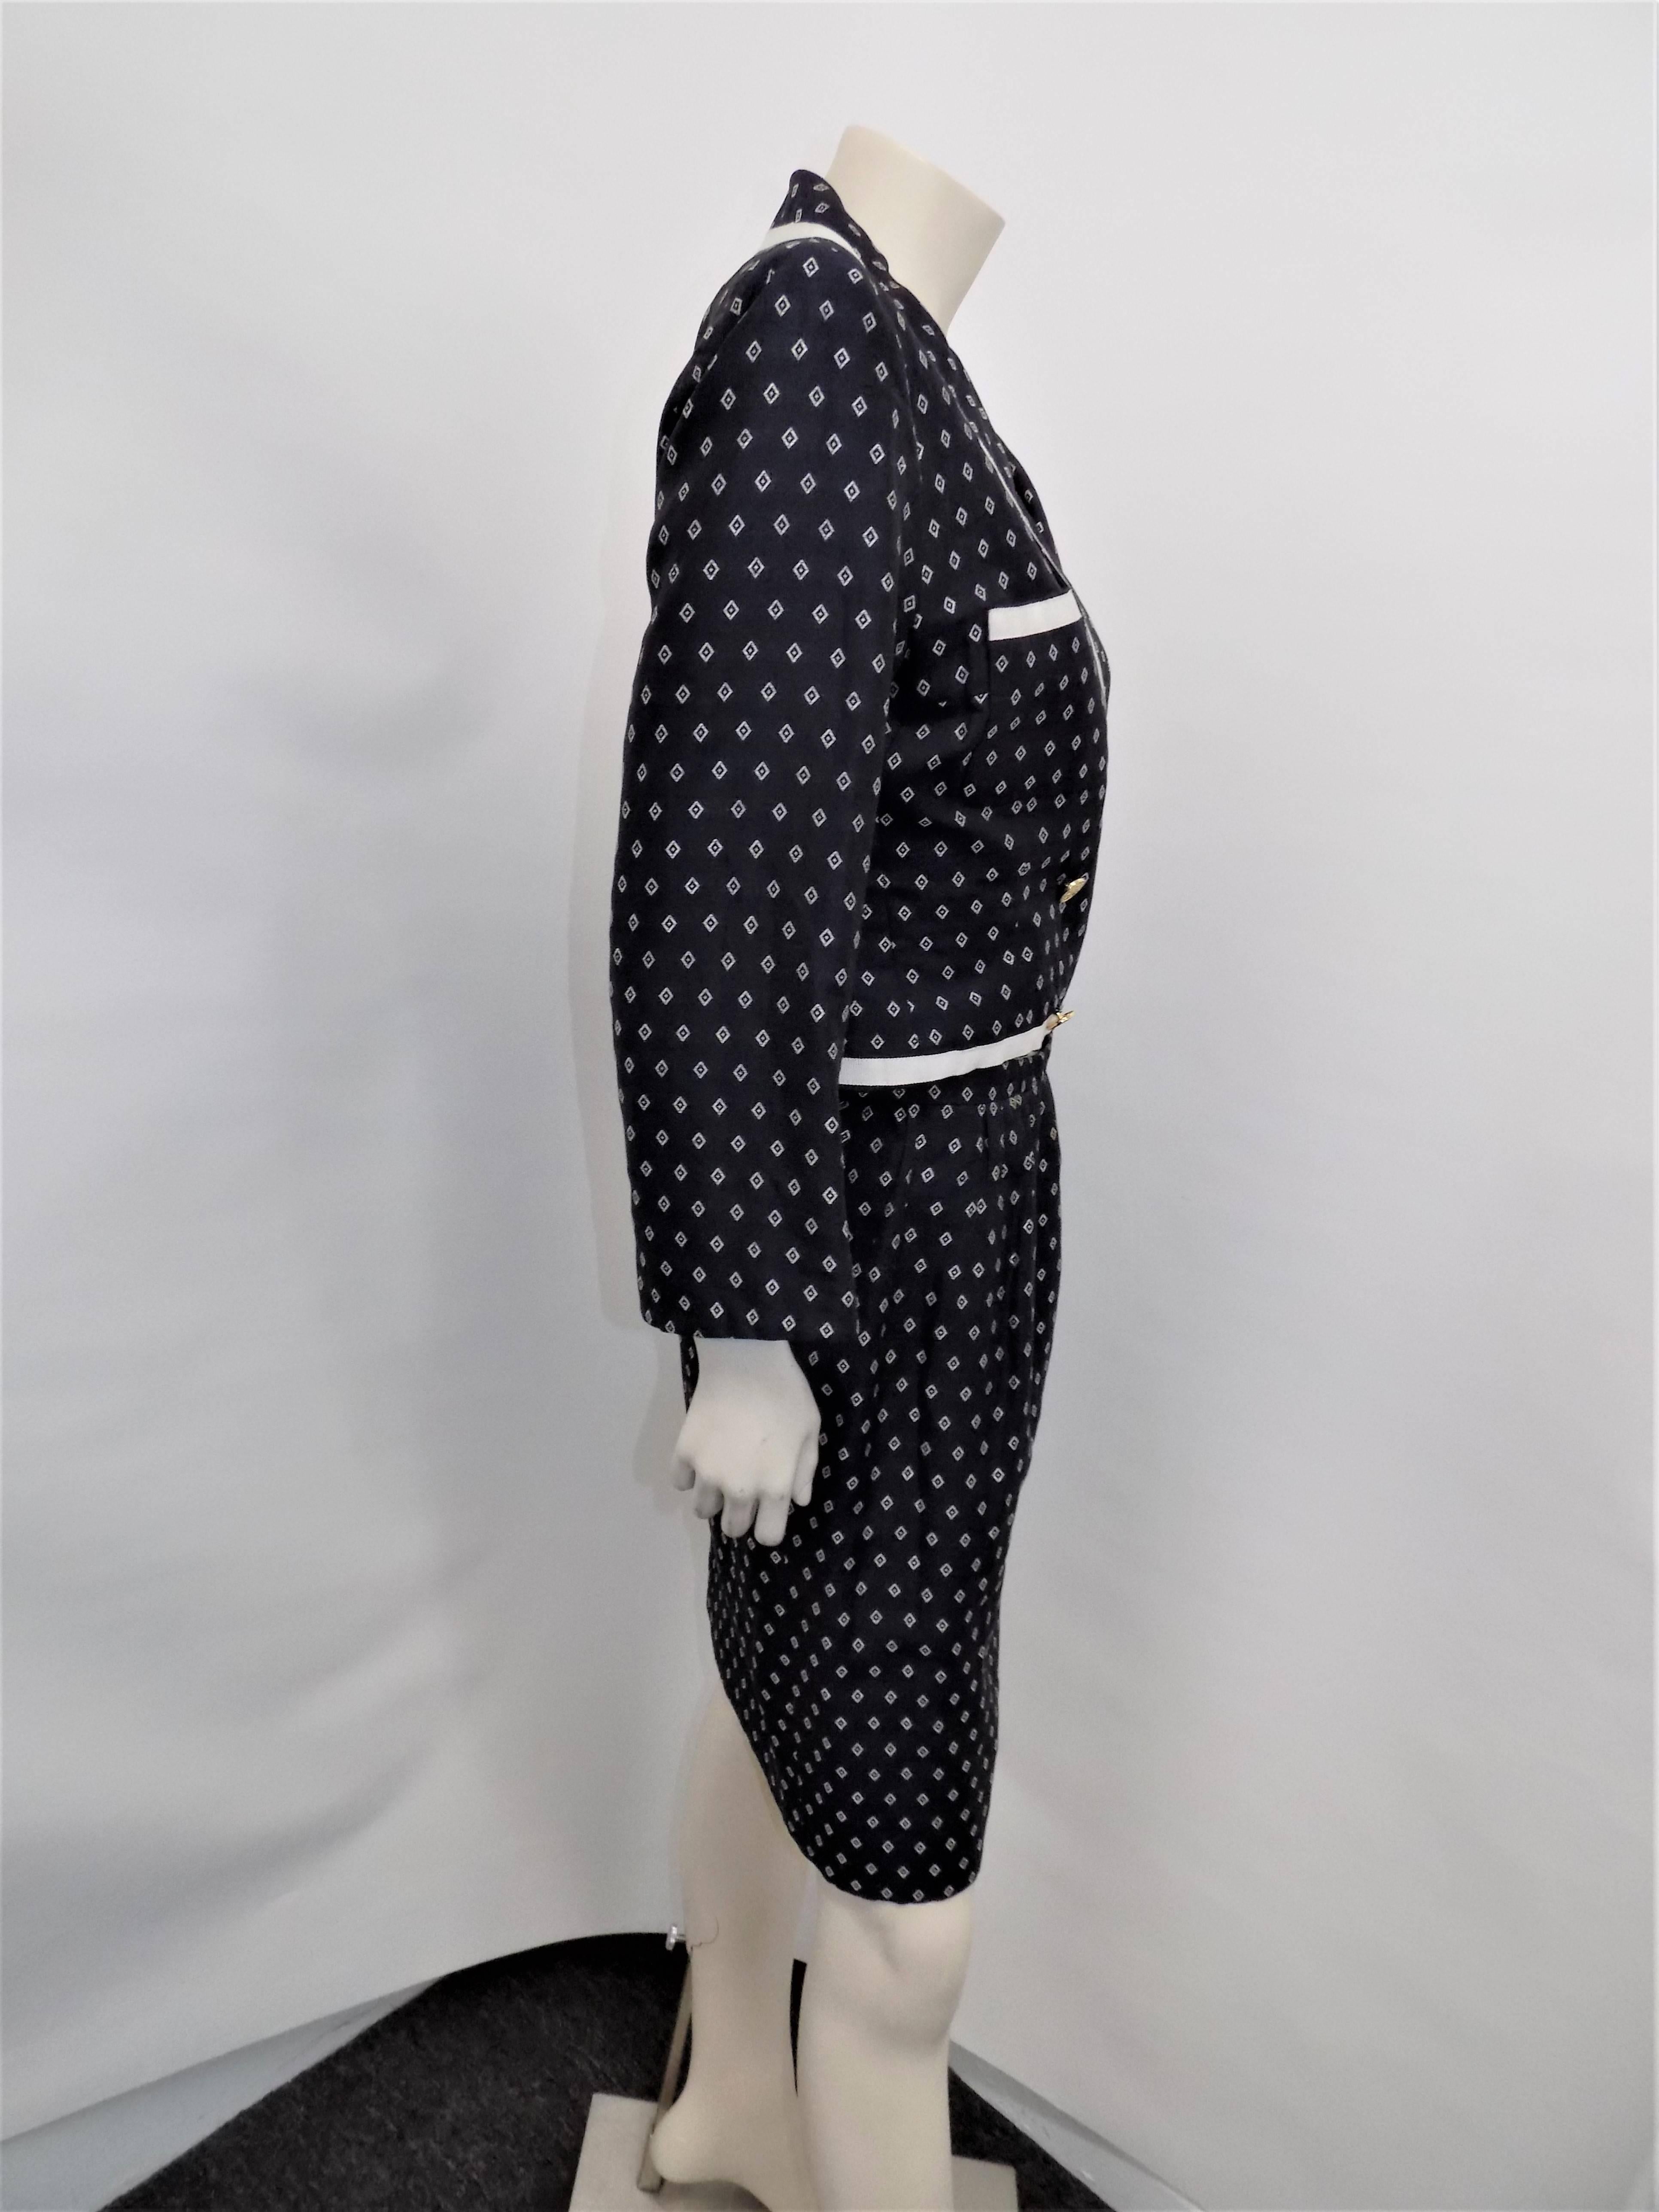 Women's Chanel nautical navy white  cropped  style shawl collar vintage skirt suit 